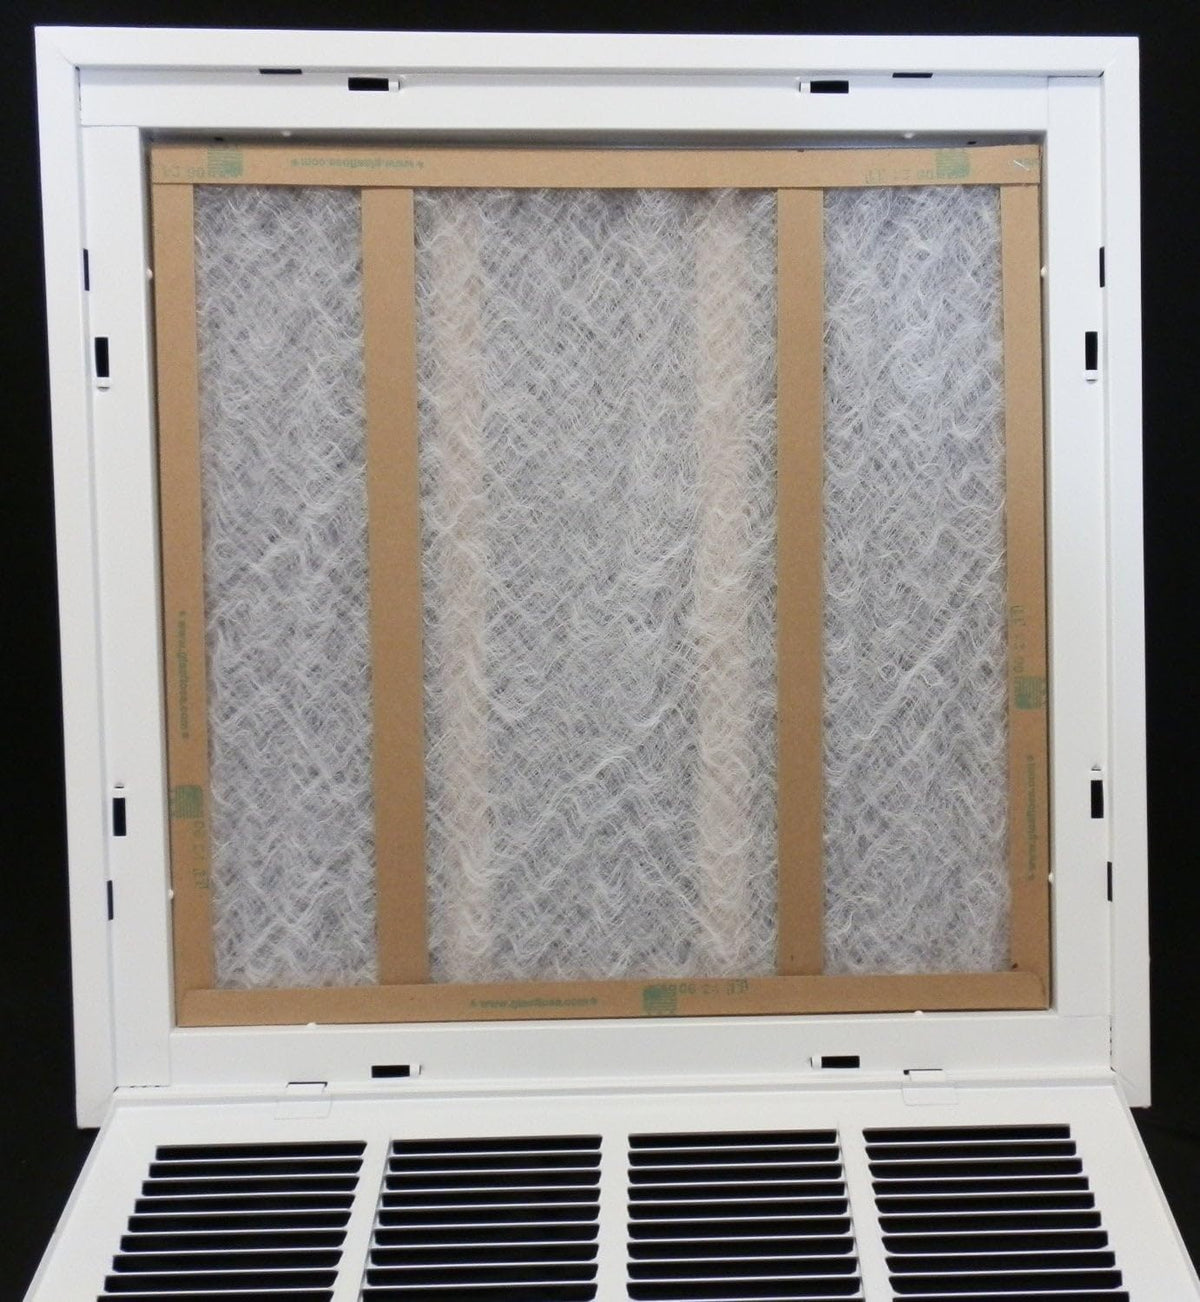 24&quot; X 30&quot; Steel Return Air Filter Grille for 1&quot; Filter - Removable Frame - * Filter Included * [Outer Dimensions: 26 5/8&quot; X 32 5/8&quot;]